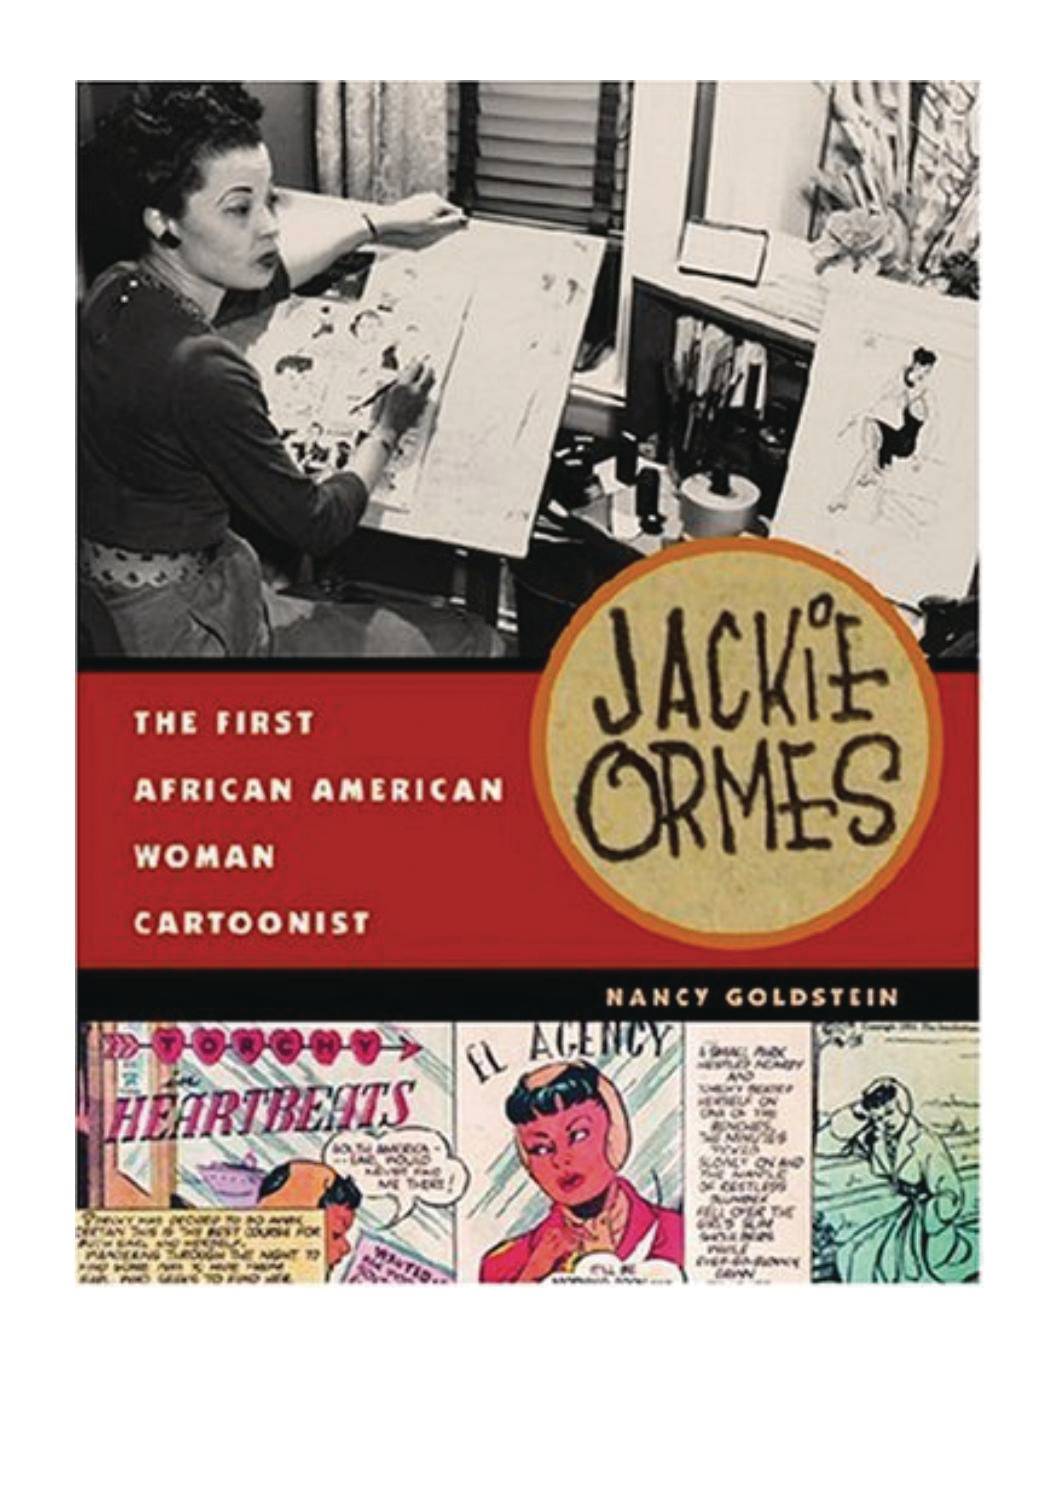 JACKIE ORMES FIRST AFRICAN AMERICAN WOMAN CARTOONIST SC